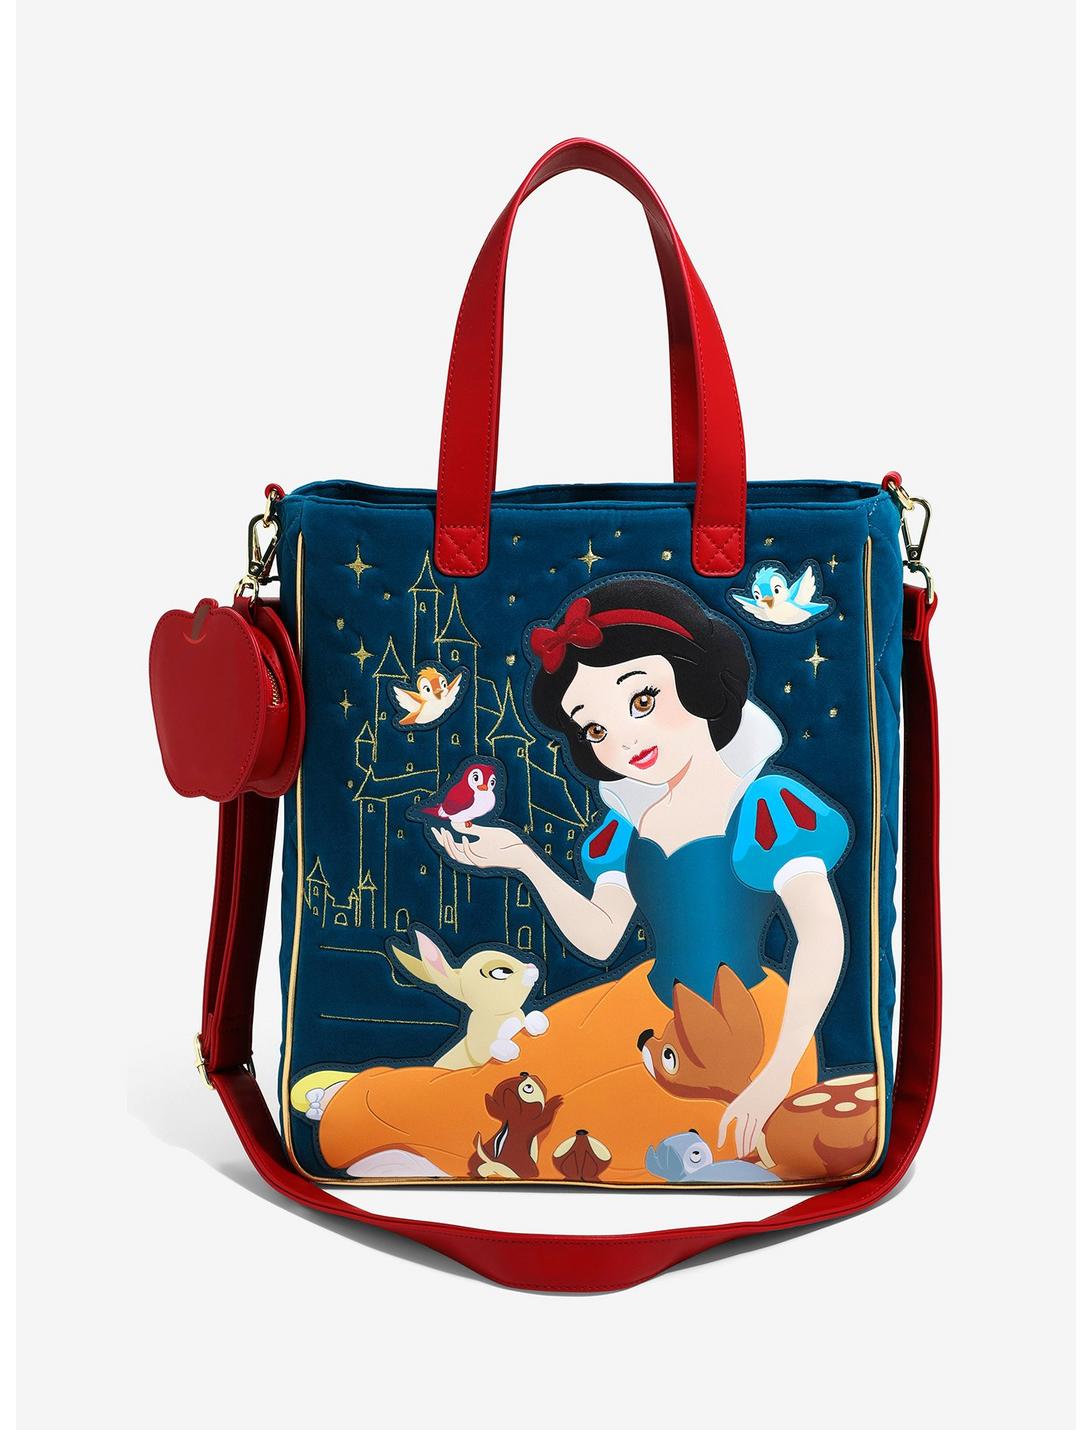 Loungefly Disney Snow White and the Seven Dwarfs Animal Critters Velvet Tote Bag and Coin Purse, , hi-res